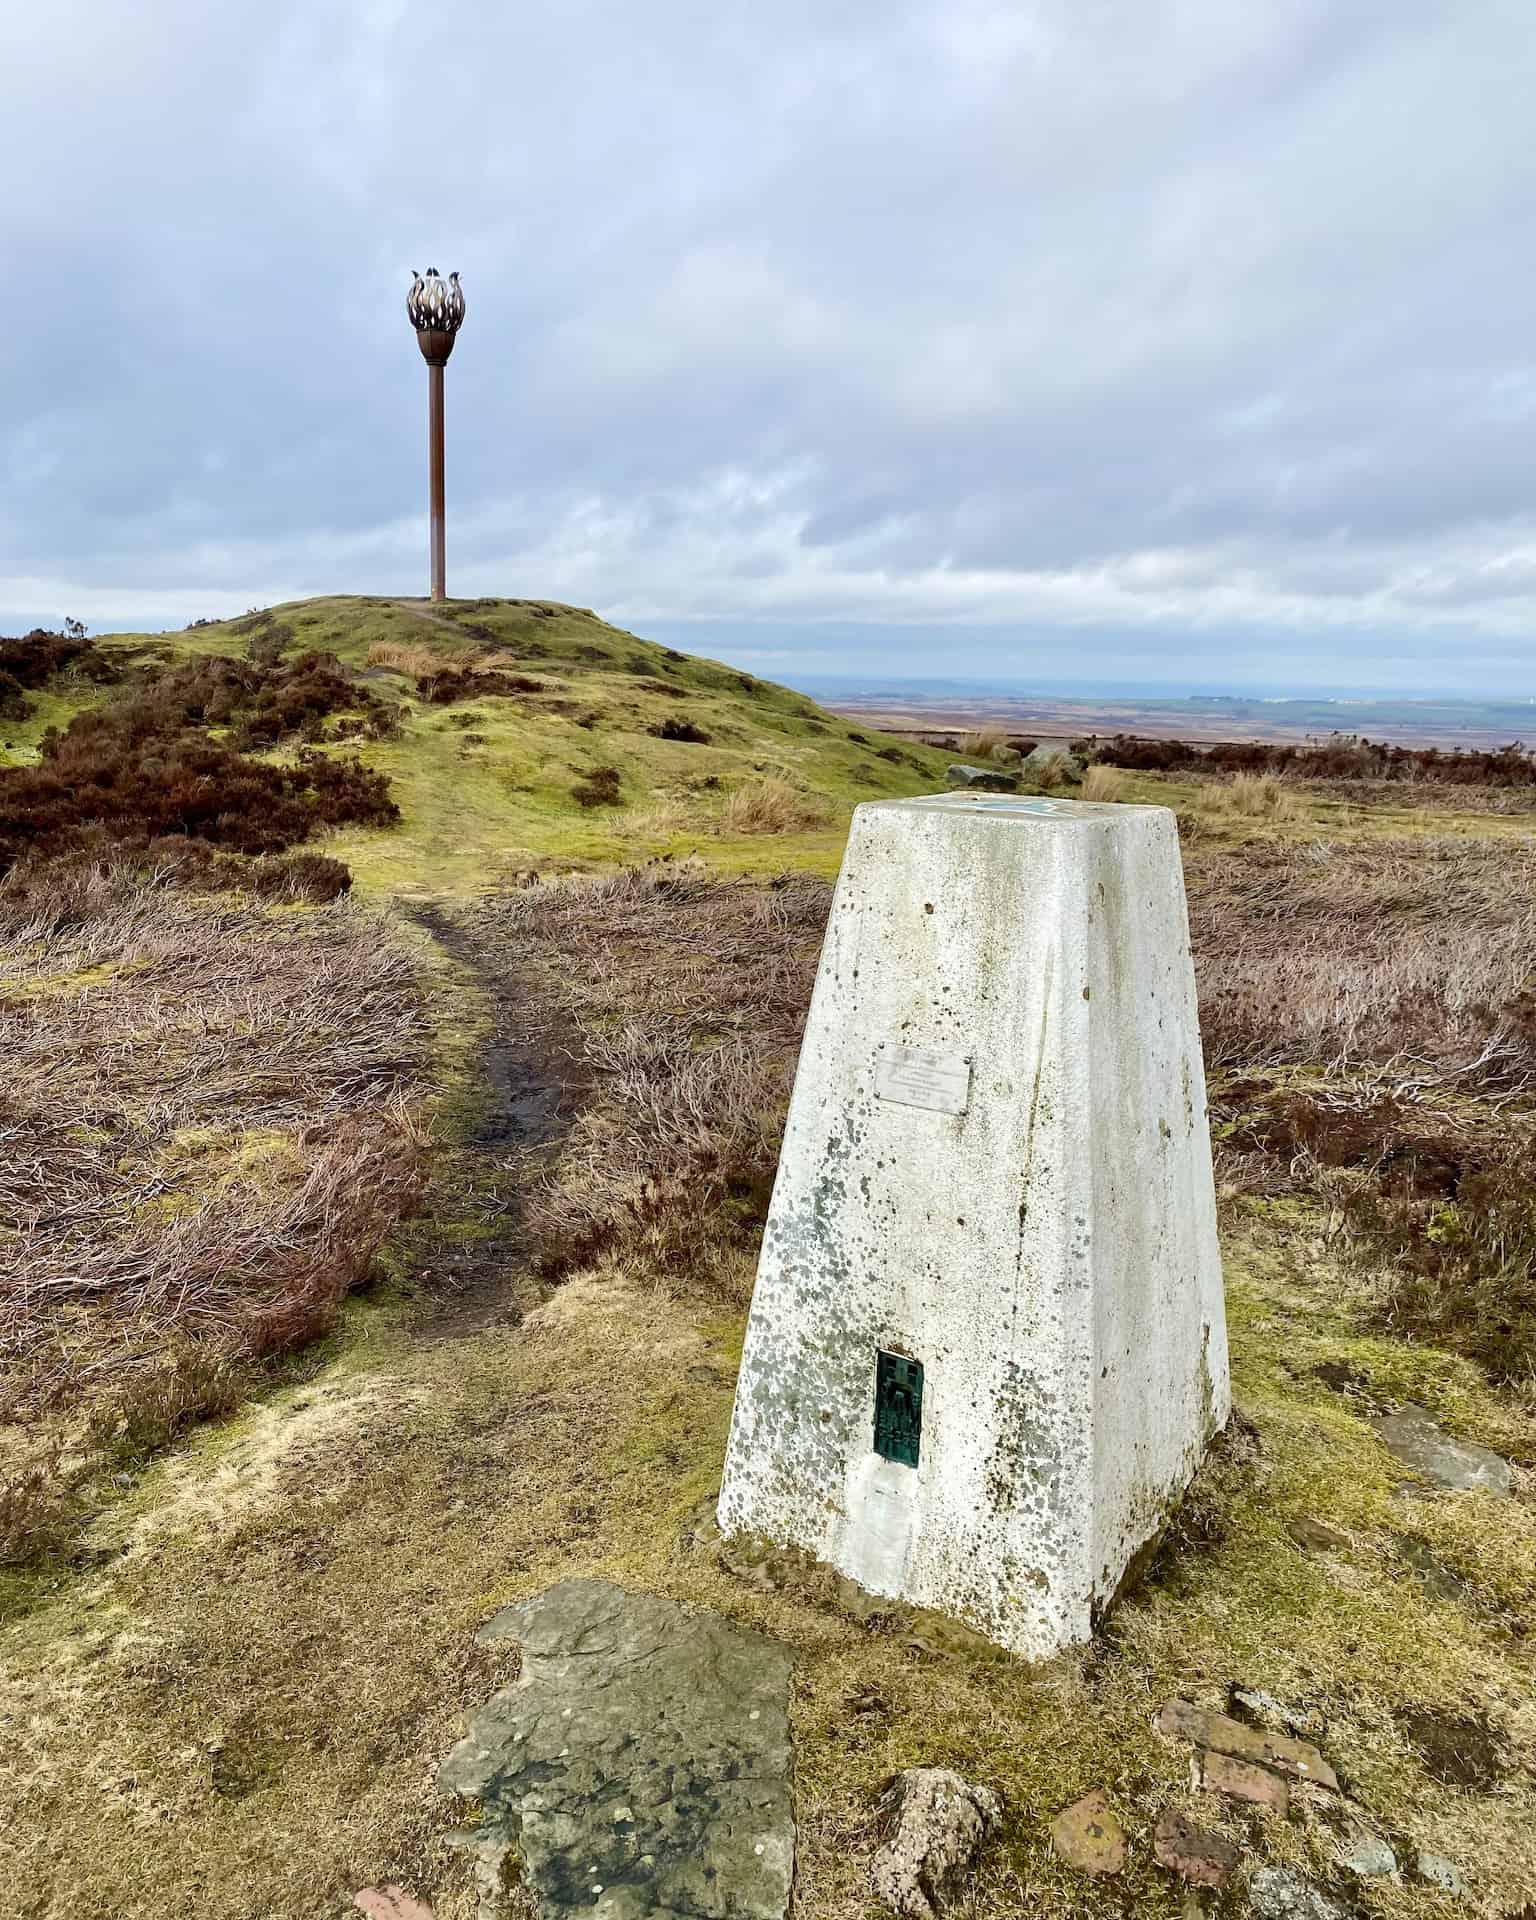 At the top of Beacon Hill, at a height of 299 metres (981 feet), is a triangulation pillar, or trig point. These concrete pillars, commonly seen in the United Kingdom, were historically used by surveyors to aid in the precise mapping of the country.